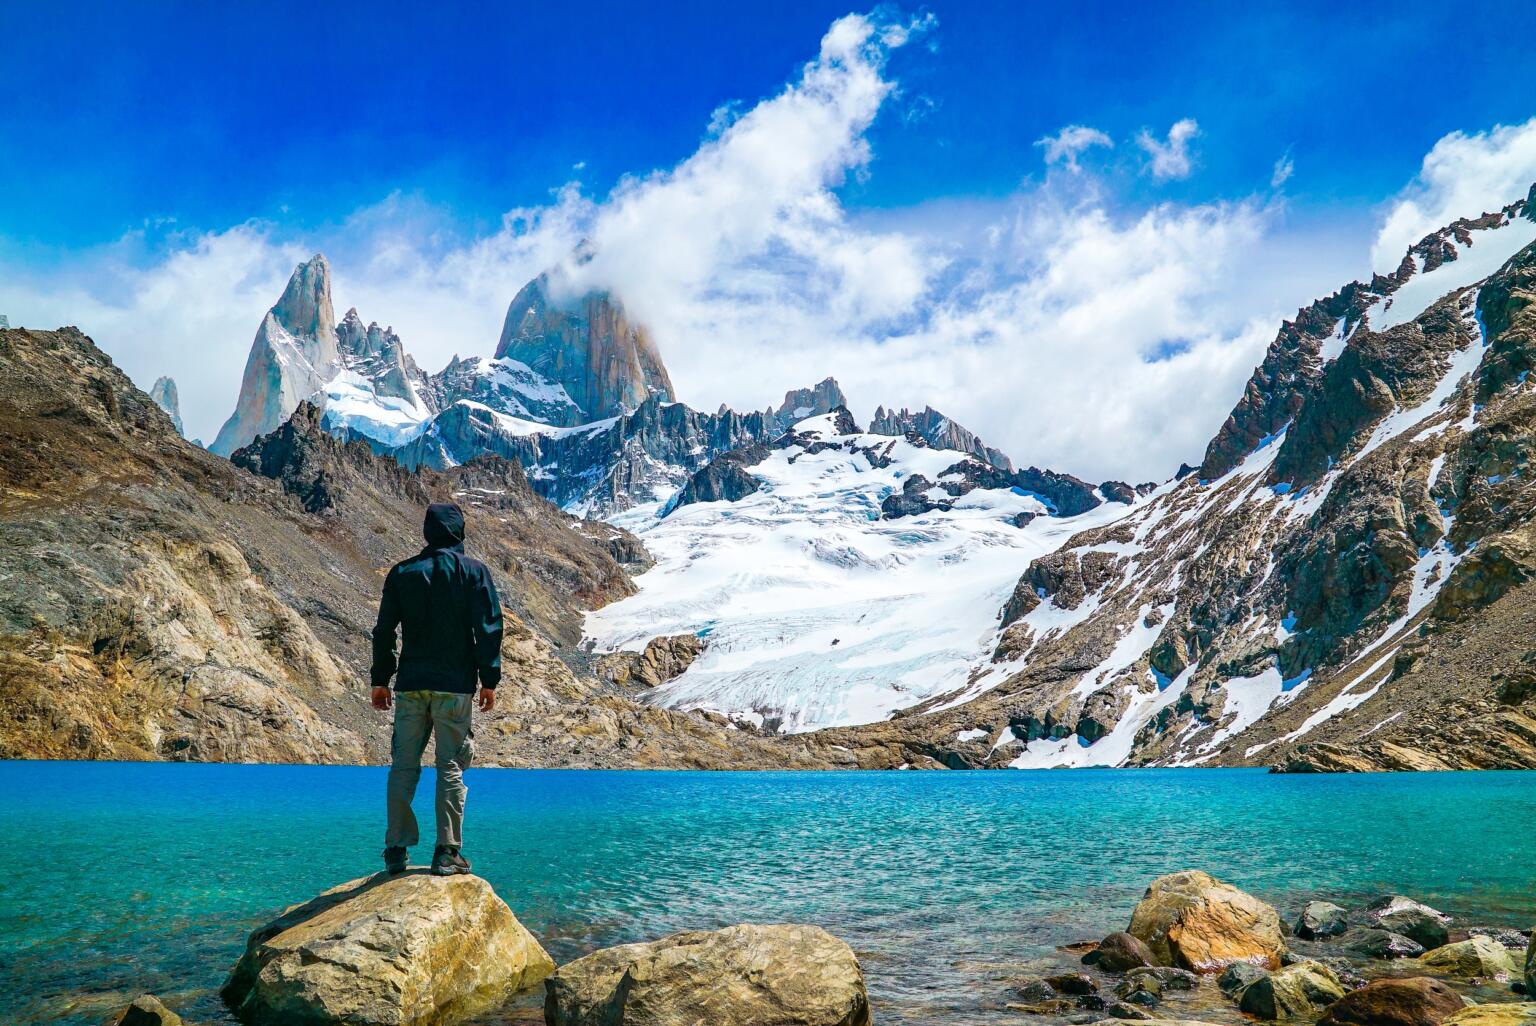 MUST READ! Is Chile Safe to Visit in 2021?